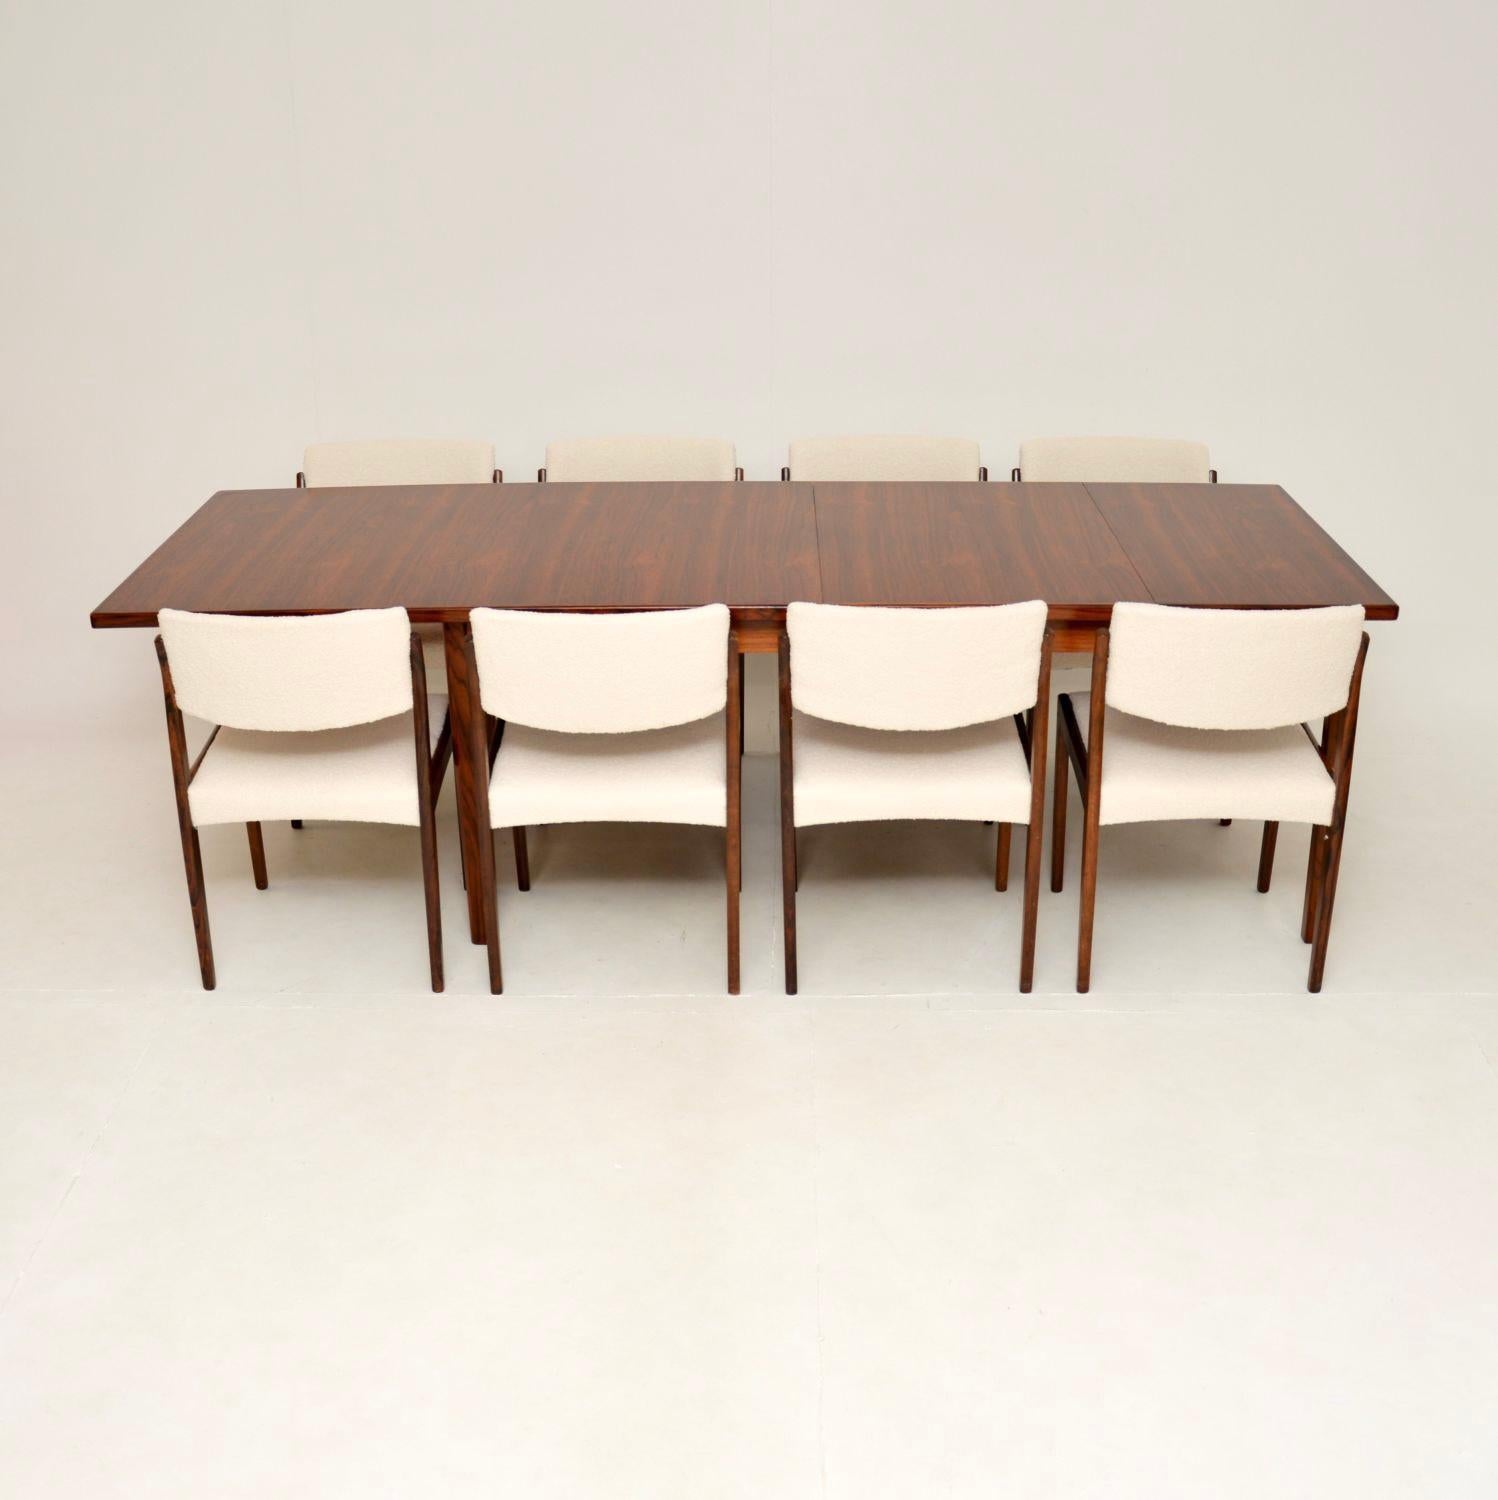 A stylish and very rare vintage dining table and eight chairs by Robert Heritage for Archie Shine. This was made in England, it dates from the 1960’s.

The quality is superb, this has absolutely gorgeous grain patterns throughout the table and